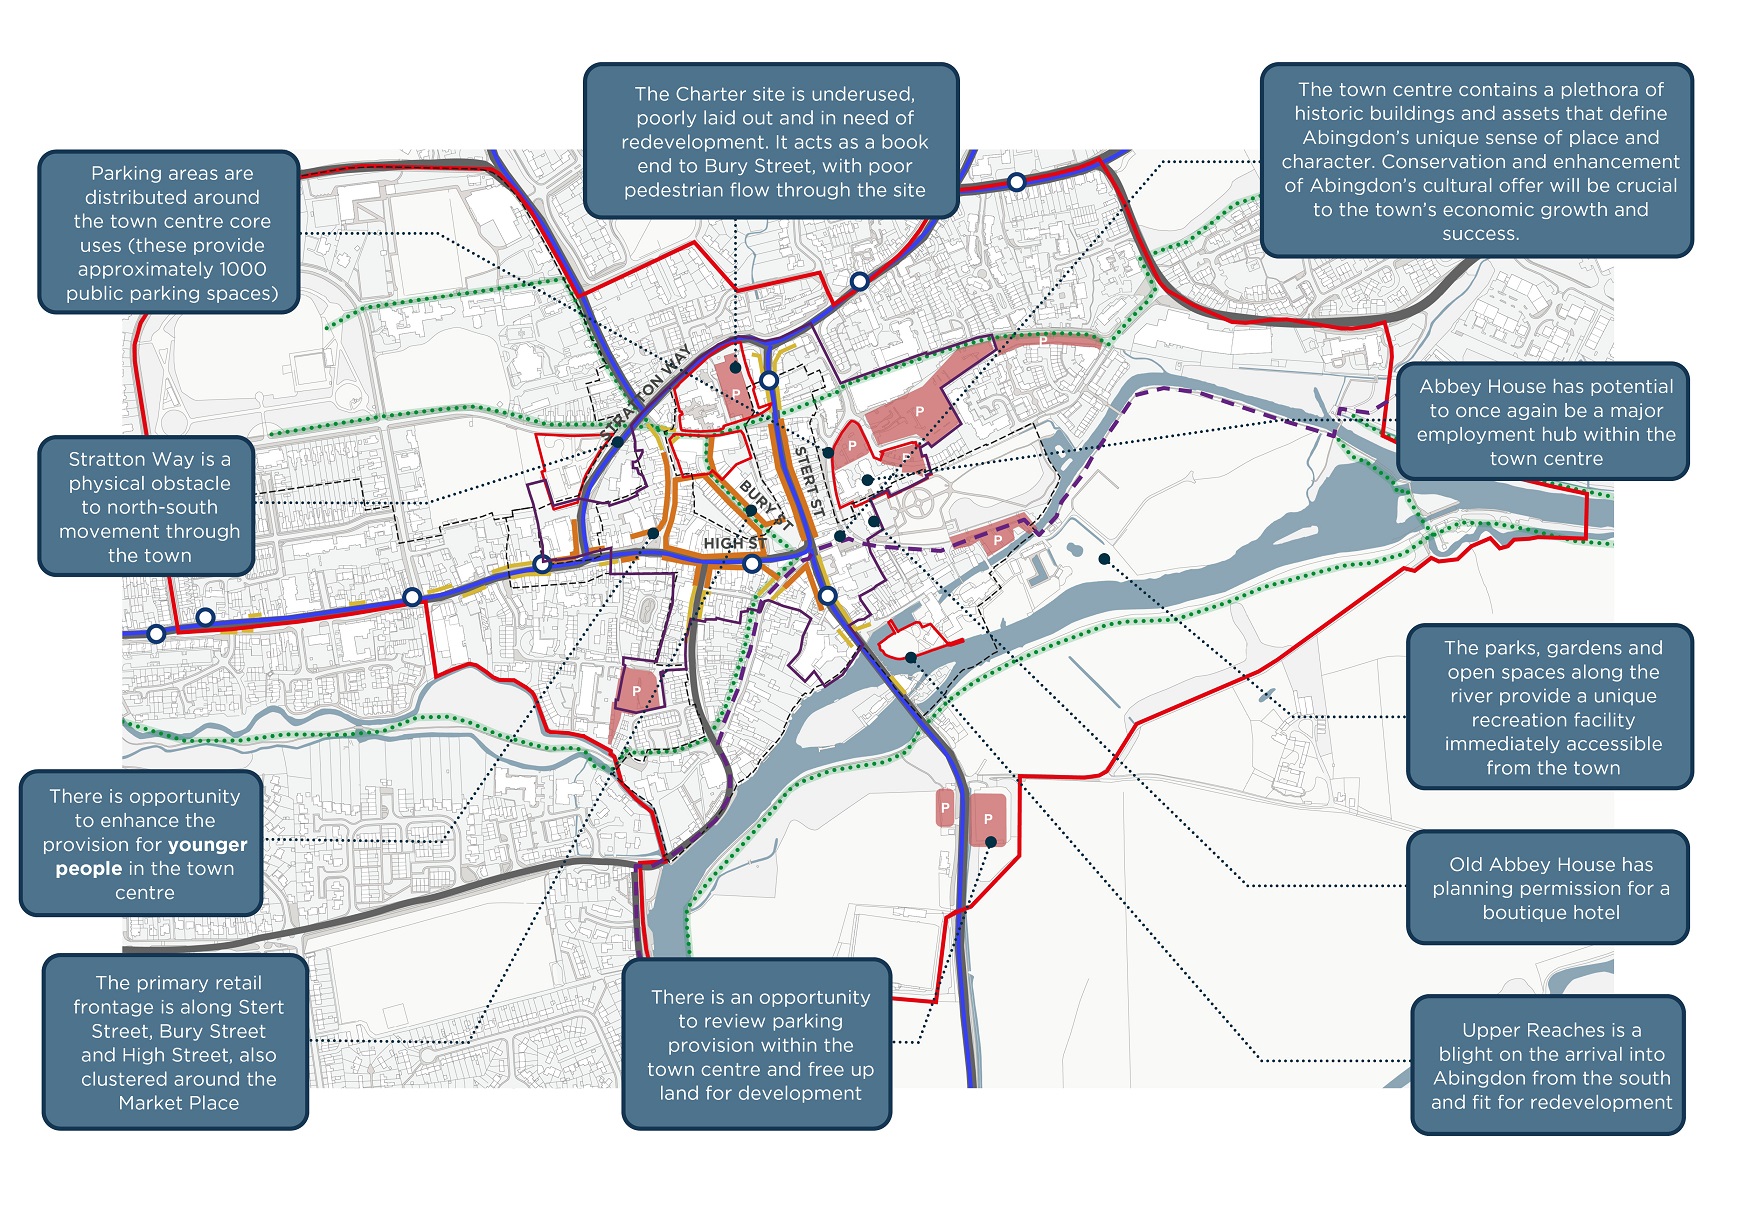 The plan illustrates existing key pedestrian, cycle and vehicular routes and carparks in the town centre. Callouts from the plan summarise key findings from the Analysis and Review undertaken at Stage 1 of the CARF. These are: 1. Parking areas are distributed around the town centre core uses. These provide approximately 1000 public parking spaces. 2. Stratton Way is a physical obstacle to north-south movement through the town. 3. There is opportunity to enhance the offer for younger people in the town centre. 4. The primary retail frontage is along Stert Street, Bury Street and High Street, also clustered around the Market Place. 5. There is an opportunity to rationalise parking provision within the town centre and free up land for development. 6. Upper Reaches is a blight on the arrival into Abingdon from the south and fit for redevelopment. 7. Old Abbey House has planning permission for a boutique hotel 8. The parks, gardens and open spaces along the river provide a unique recreation facility immediately accessible from the town 9. Abbey House has potential to once again be a major employment hub within the town centre. 10. The town centre contains a plethora of historic buildings and assets that define Abingdon’s unique sense of place and character. Conservation and enhancement of Abingdon’s cultural offer will be crucial to the town’s economic growth and success. 11. The Charter site is underused, poorly laid out and in need of redevelopment. It acts as a book end to Bury Street with poor pedestrian flow through the site.